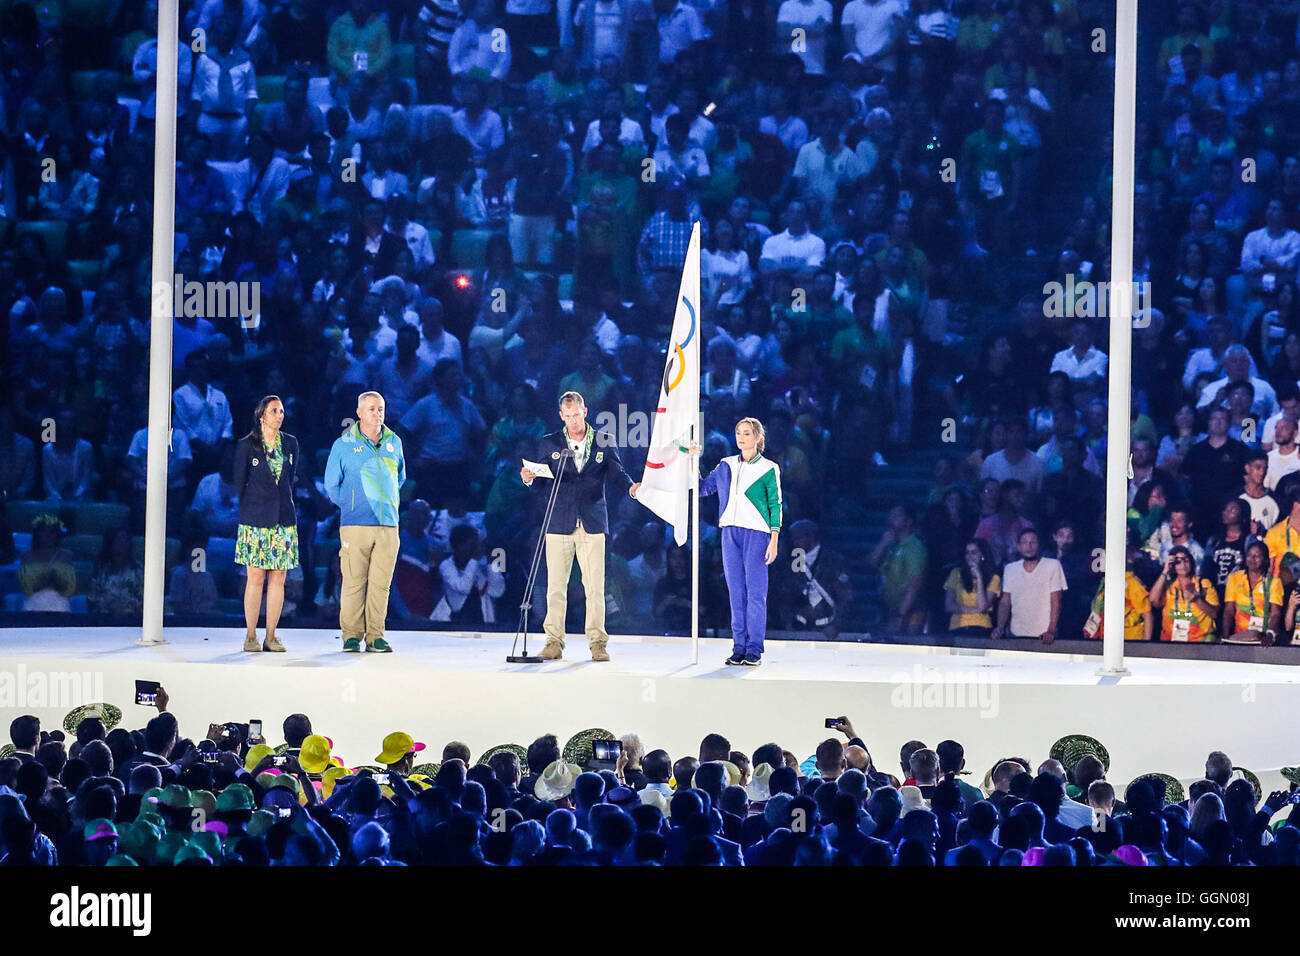 Rio de Janeiro. 5th Aug, 2016. OPENING OF THE RIO 2016 OLYMPICS - The athlete Robert Scheidt takes the oath of the athletes during the opening of the Rio 2016 Olympics held in the Maracana Stadium. (Photo: Andre Chaco/Fotoarena/Alamy Live News) Stock Photo